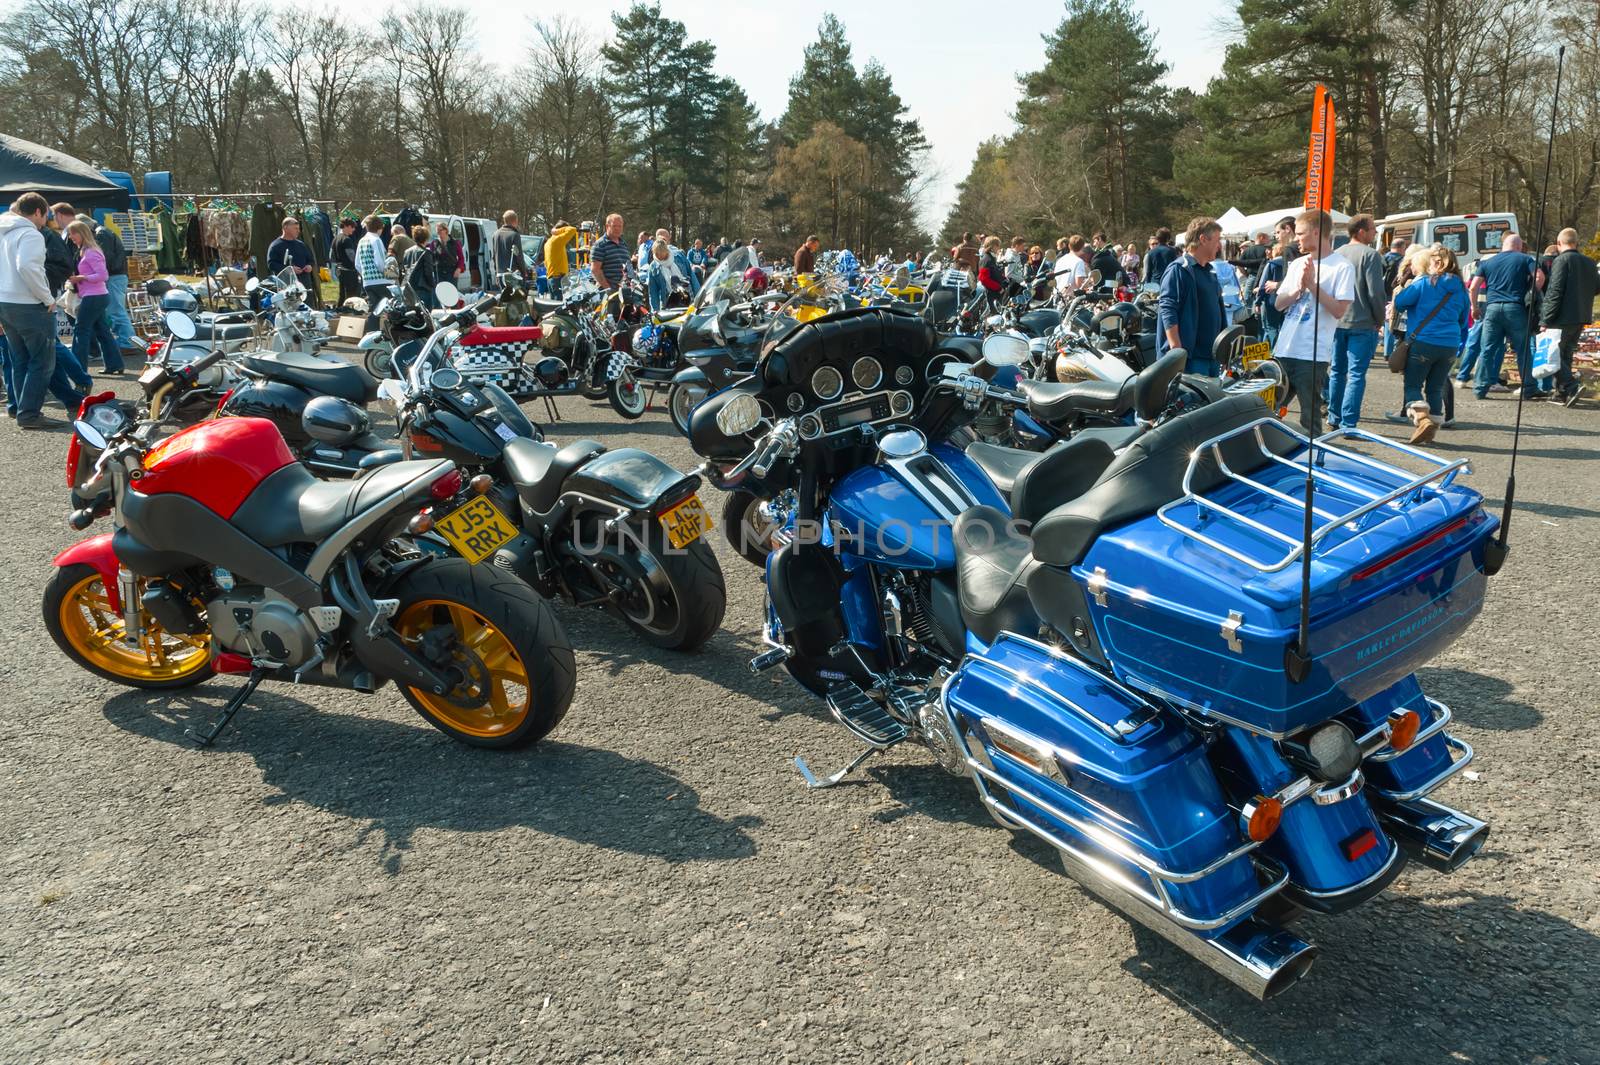 FARNBOROUGH, UK - APRIL 6, 2012: A large number of classic and modern motorcycles on display at the Wheels Day auto and bike festival on April 6, 2012 in Farnborough, UK